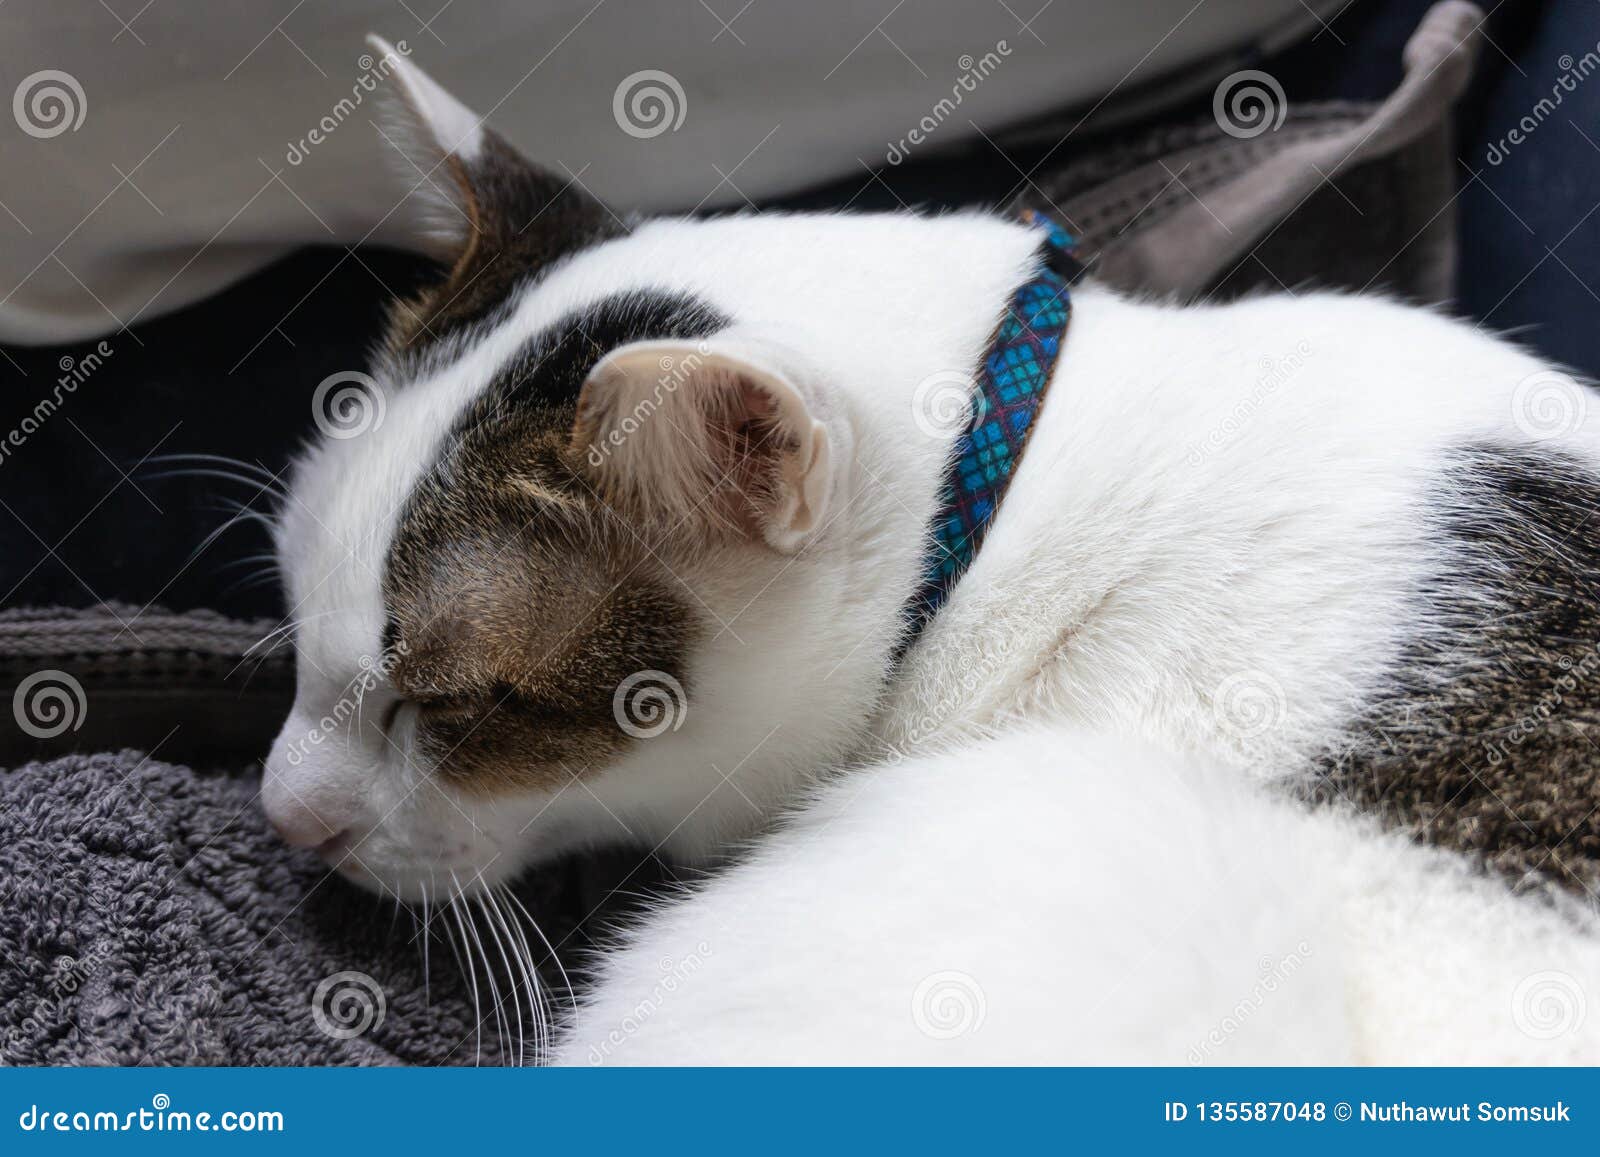 calm white sleeping domestic cat with blue neckband on cloth in winter day time